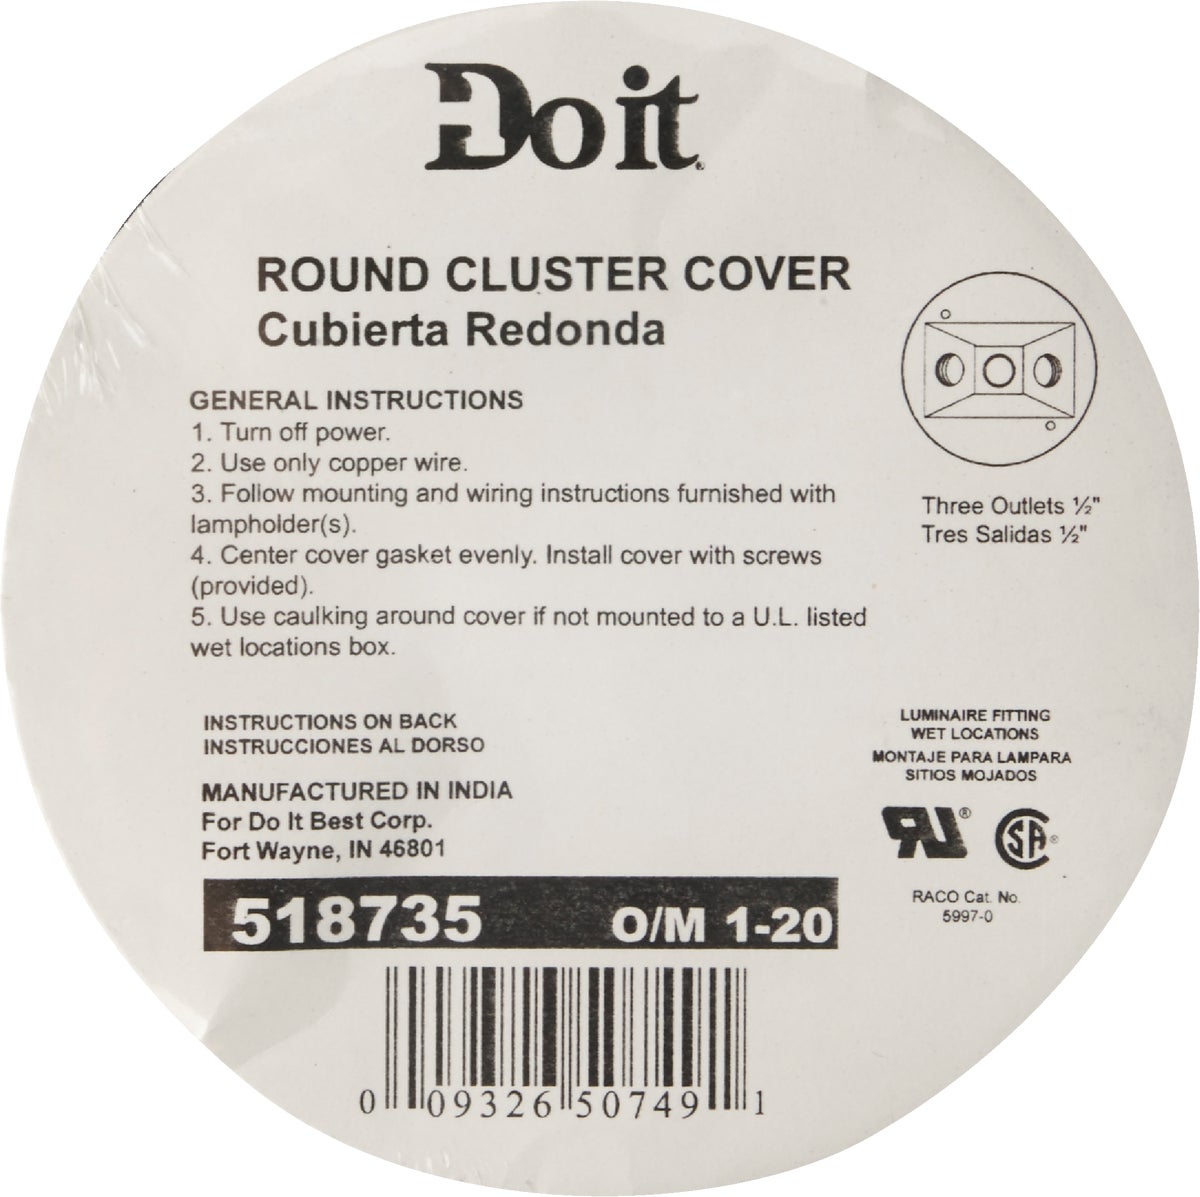 Lot of 10 Covers Brand New Bell Outdoor Round Cluster Cover 3 Outlets 1/2" 